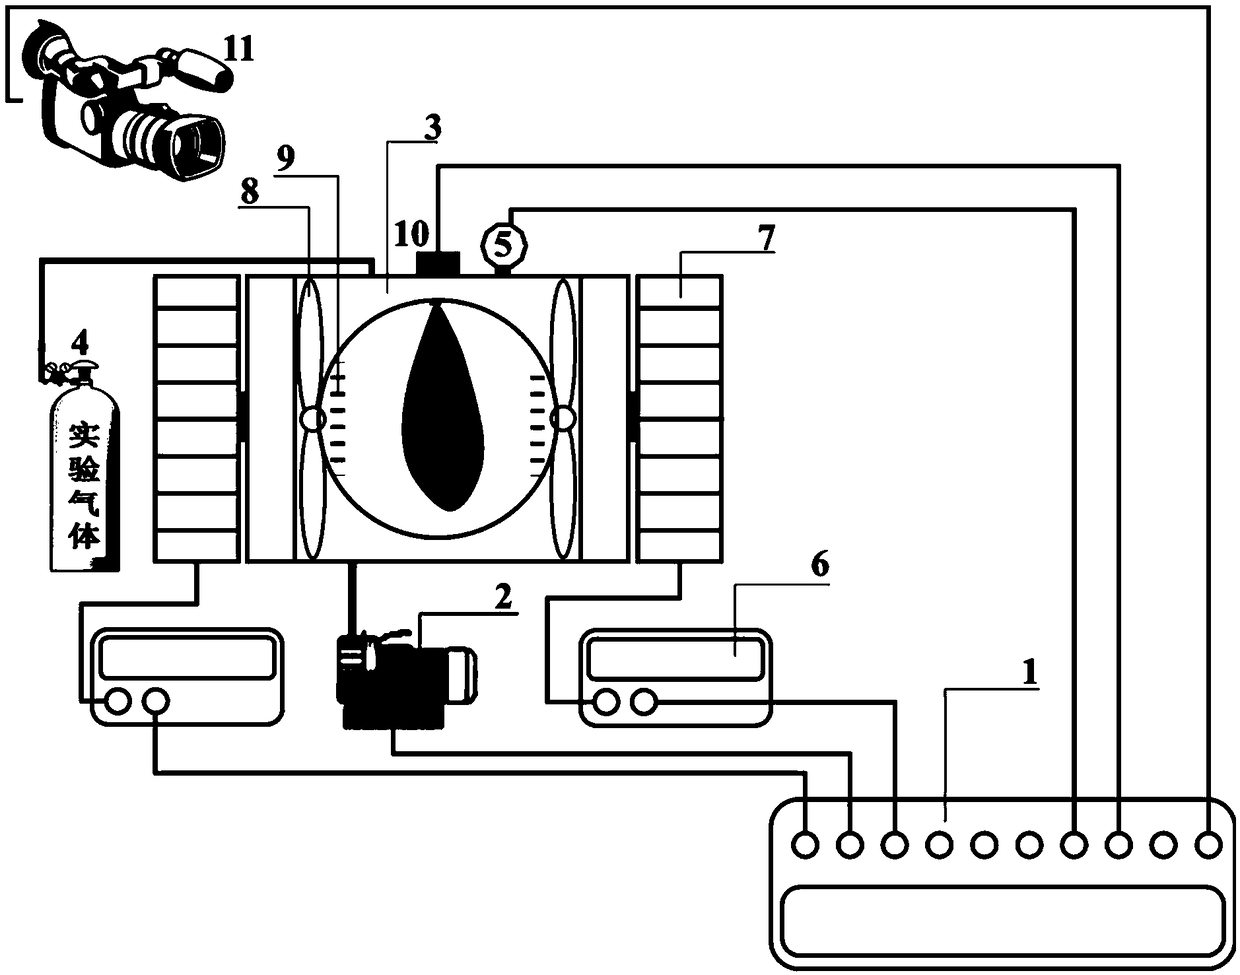 Constant volume experiment device capable of simulating injection and atomization processes in isotropic and anisotropic turbulent flow fields